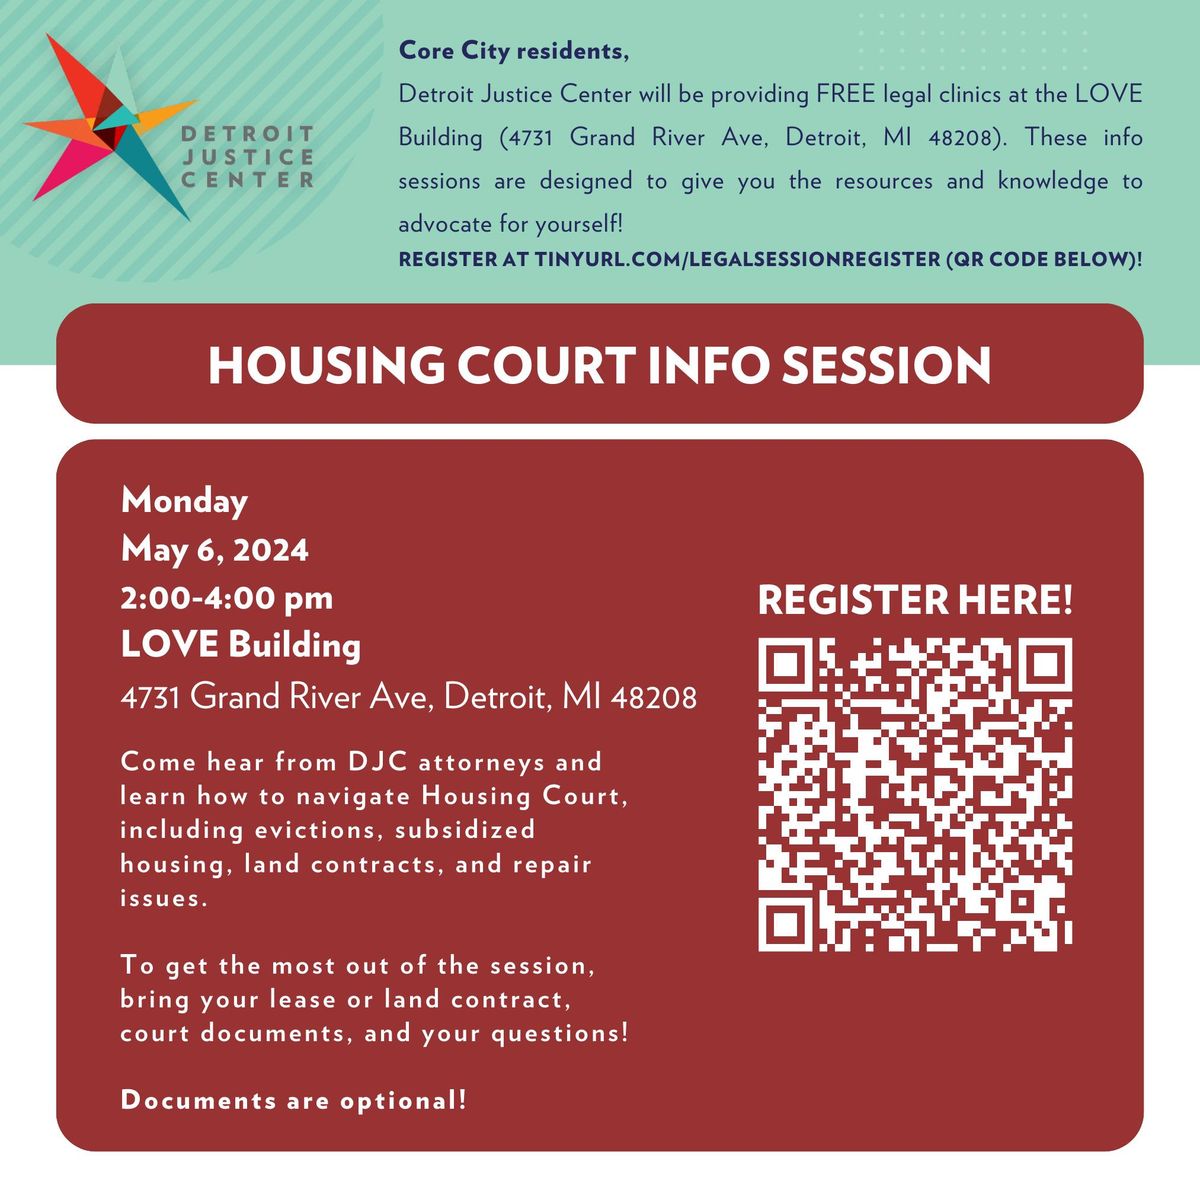 FREE Core City Legal Clinics - Housing Court Information Session